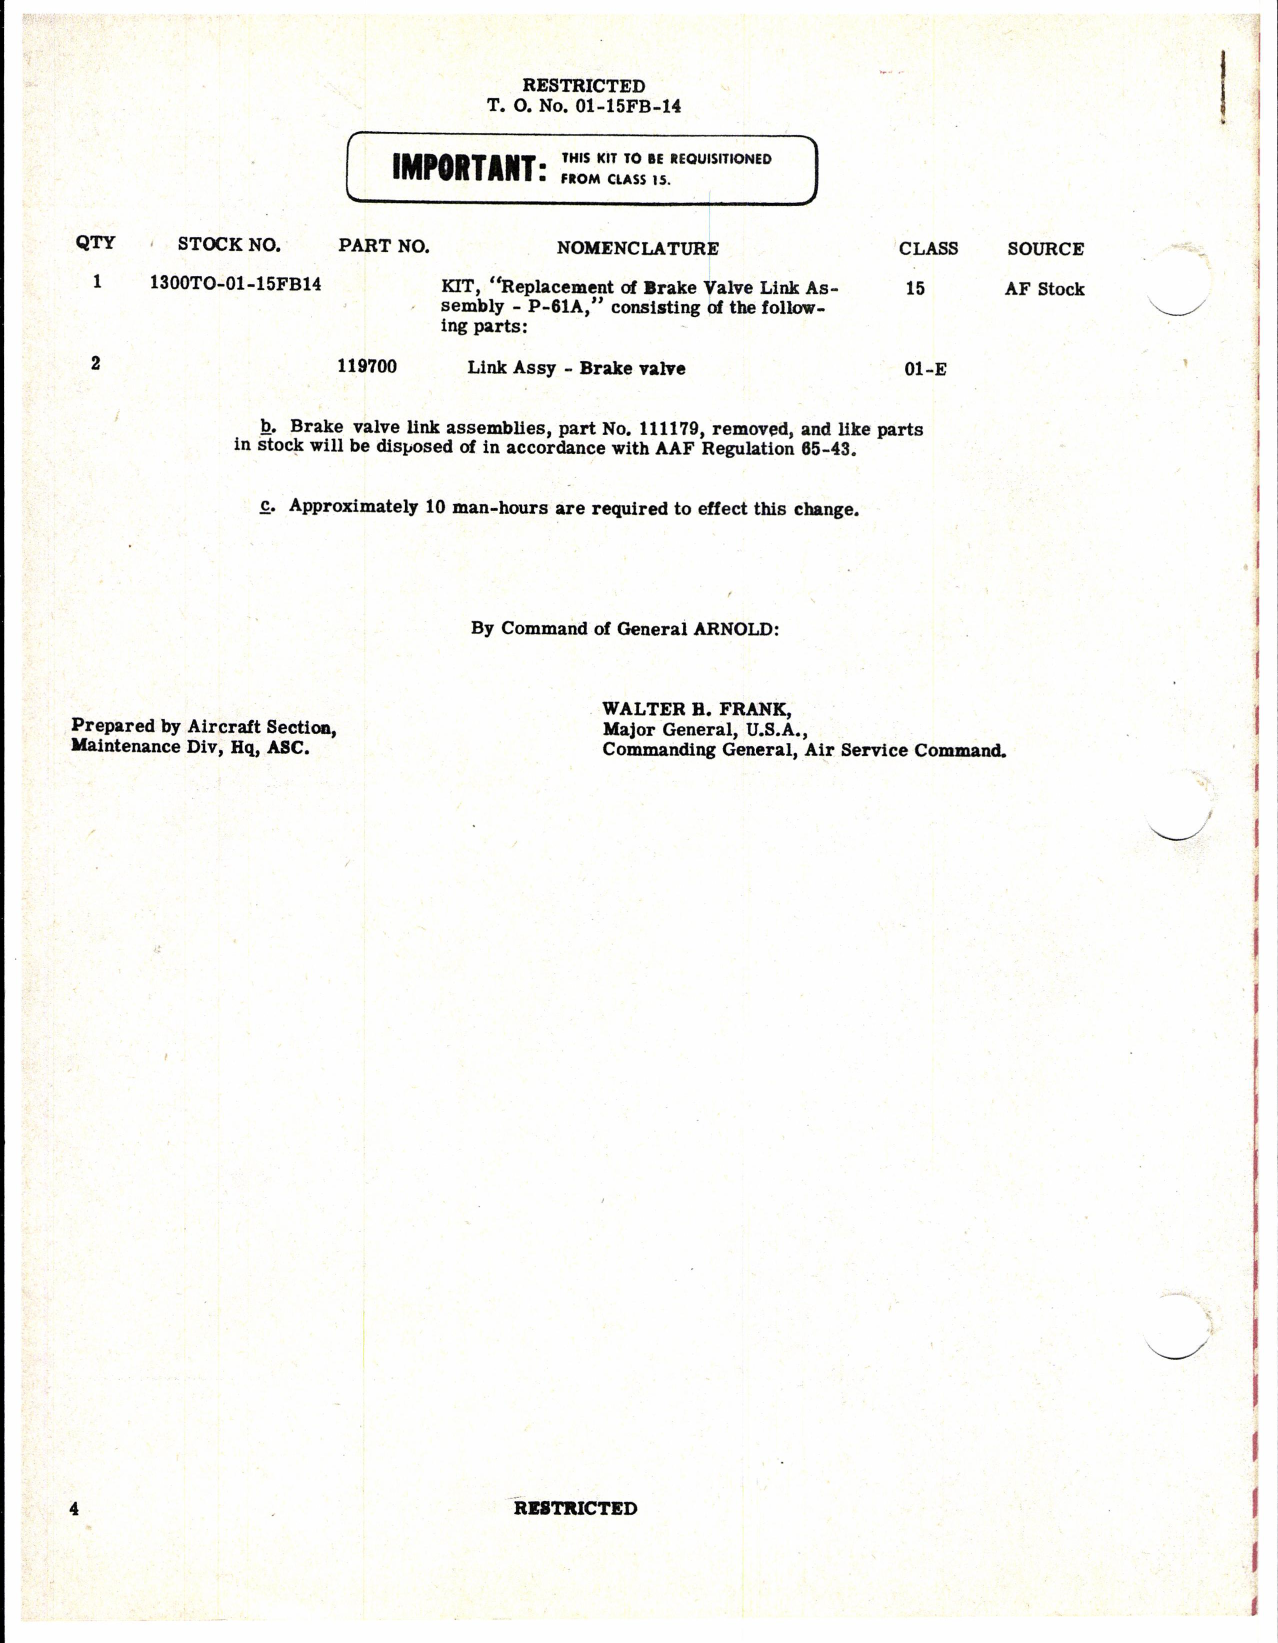 Sample page 4 from AirCorps Library document: Northrop - Replacement of Brake Valve Link Assembly for P-61A